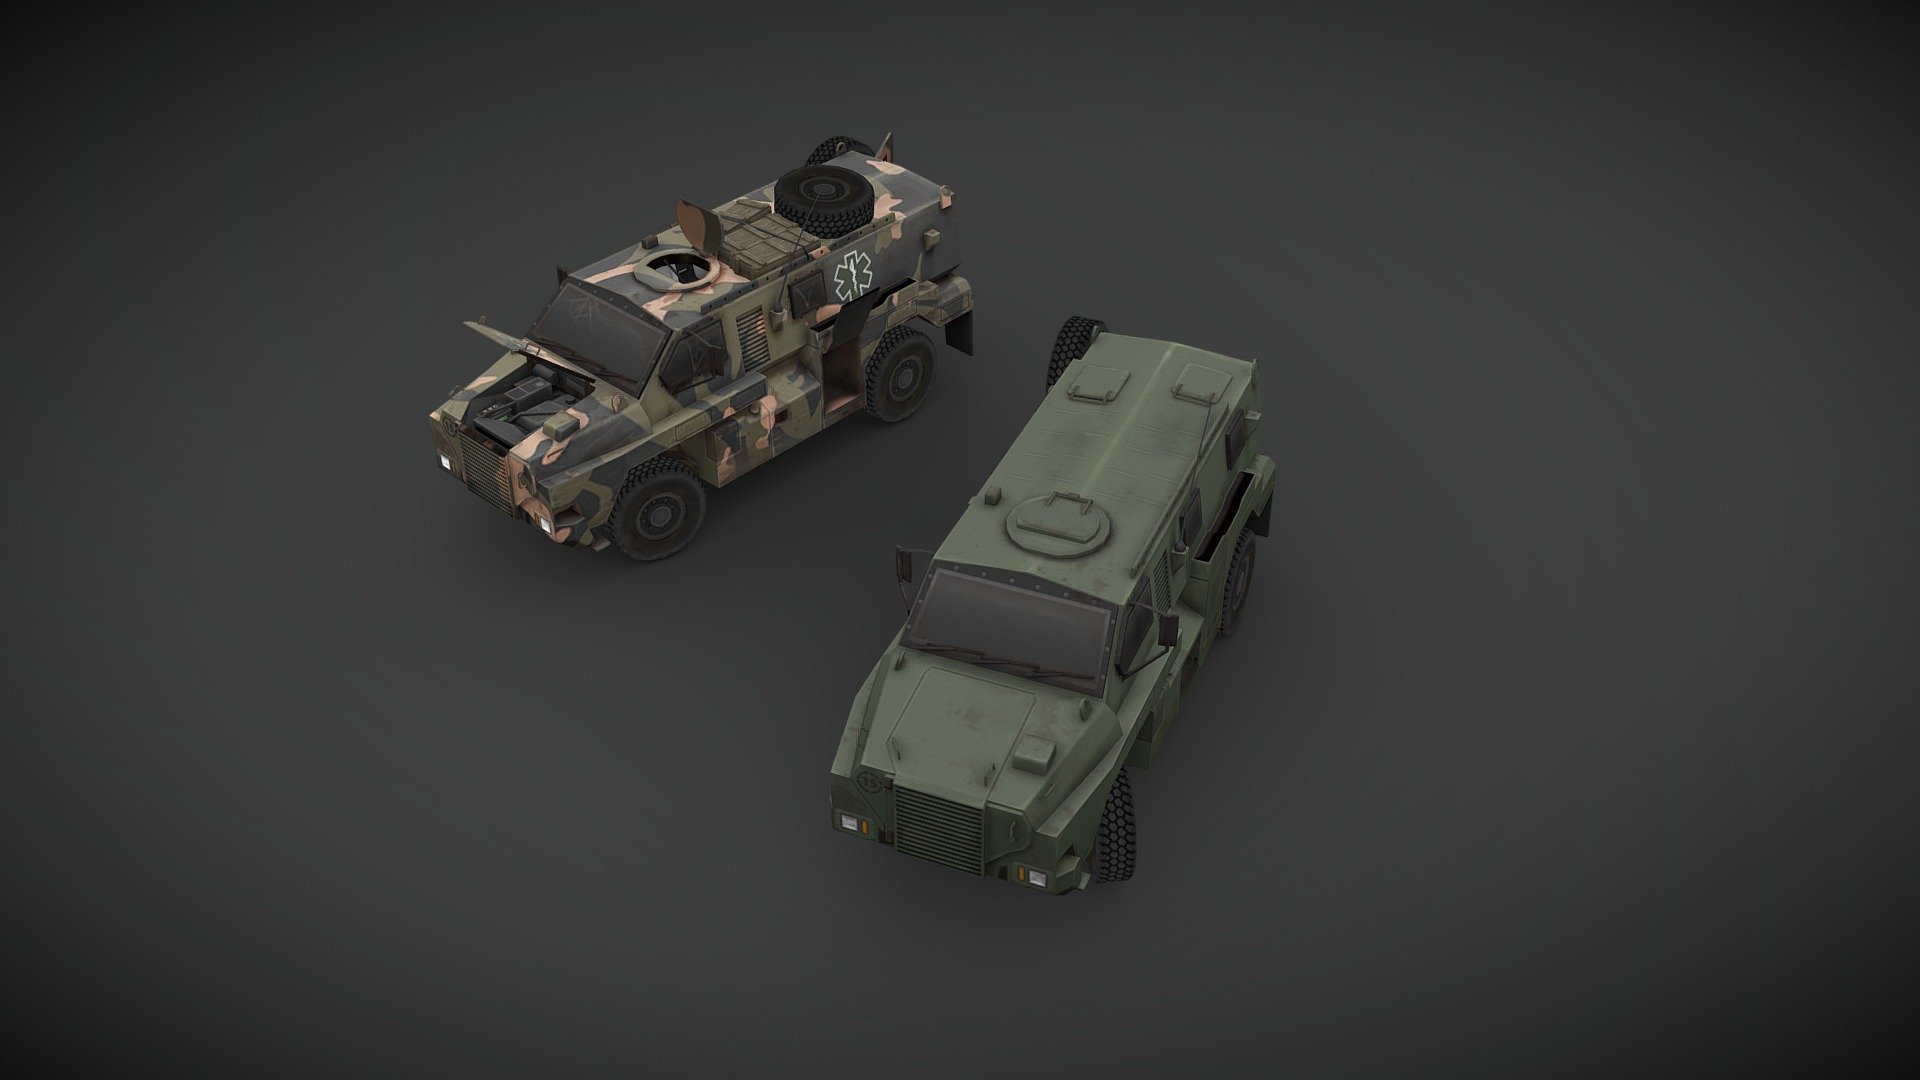 Showcase of a 1997 Australian Defence Industries Bushmaster Protected Mobility Vehicle, I’ve made for project ZOMBOID, low poly but with a high detail texture, optimized for game engine. This version is not a 100% true to the original since there are some compromises I’ve had to make to present it here.

You can find the actual version in project ZOMBOID STEAM Workshop 3d model